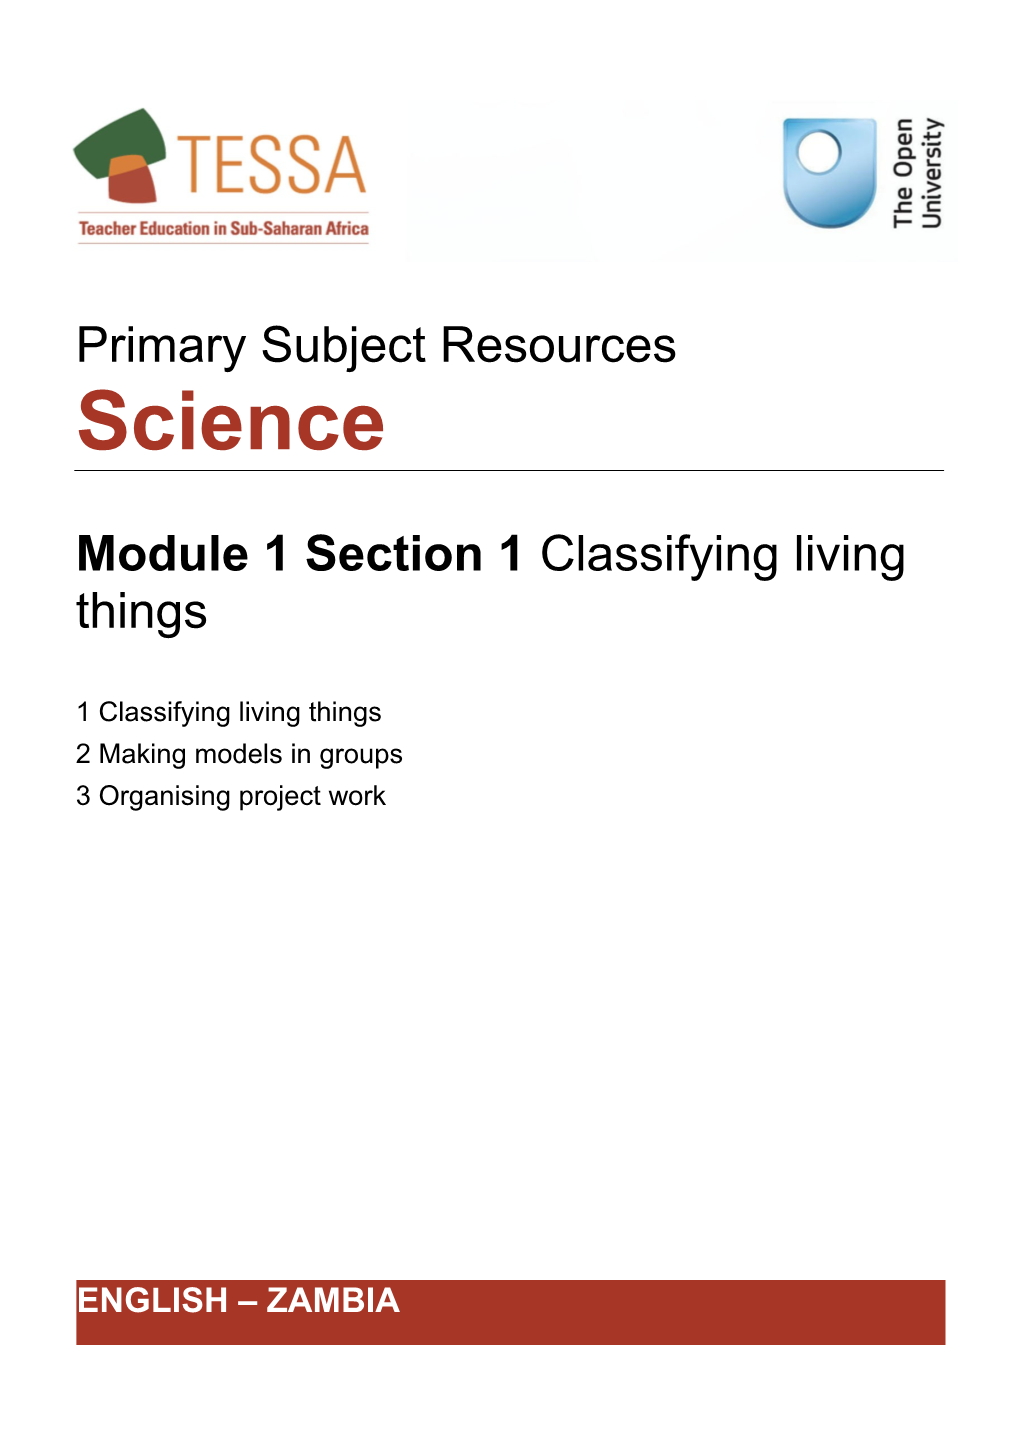 Module 1: Science - Looking at Life